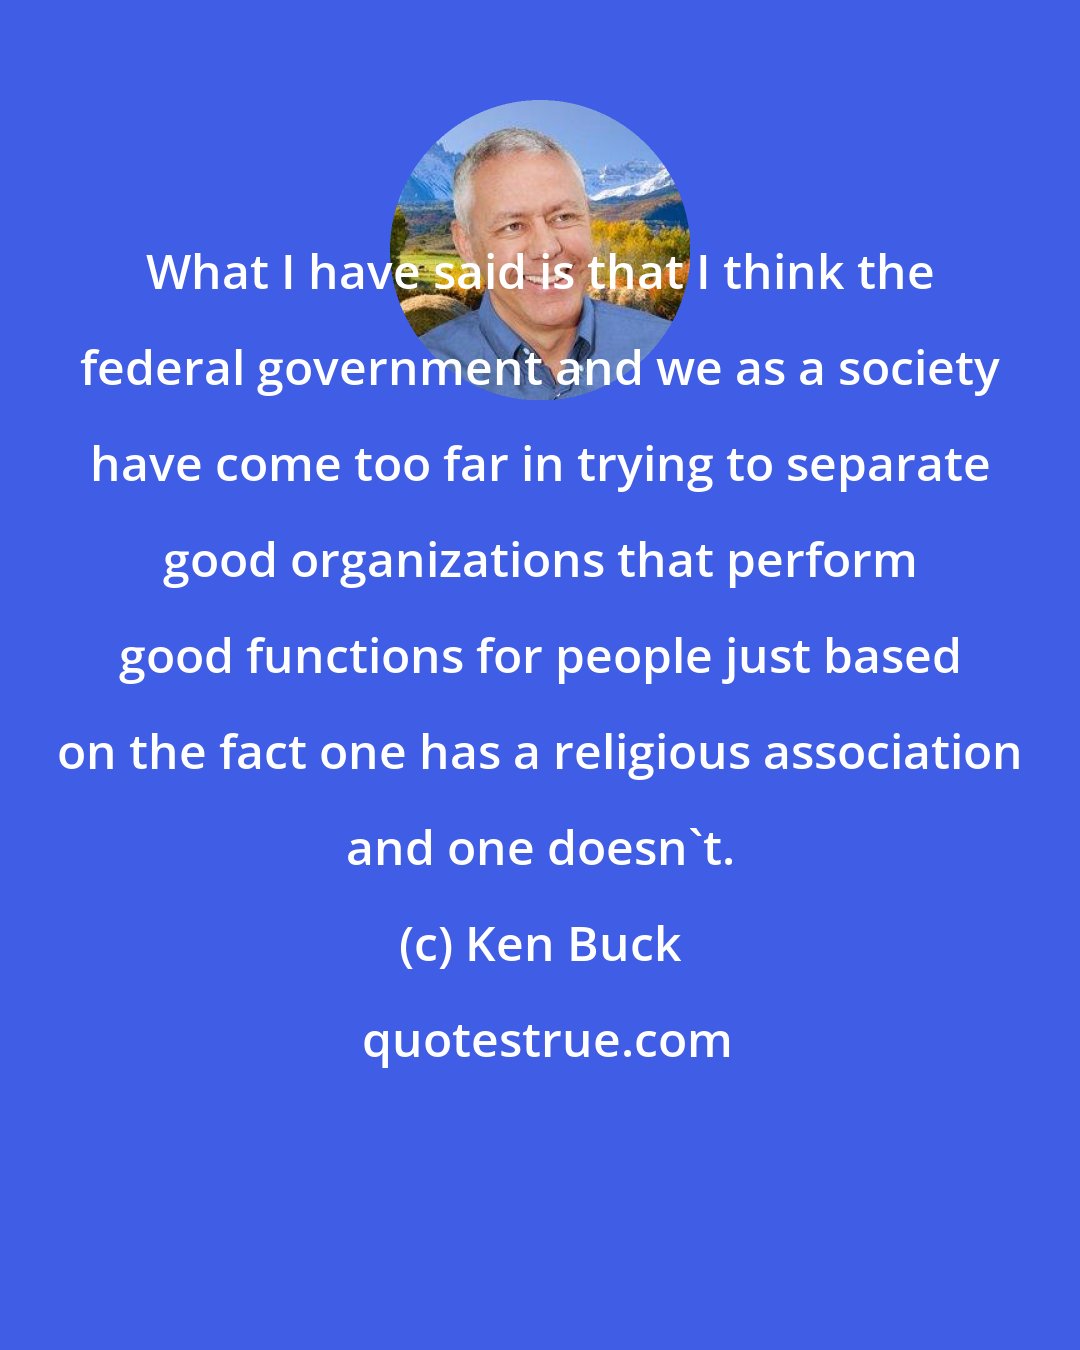 Ken Buck: What I have said is that I think the federal government and we as a society have come too far in trying to separate good organizations that perform good functions for people just based on the fact one has a religious association and one doesn't.